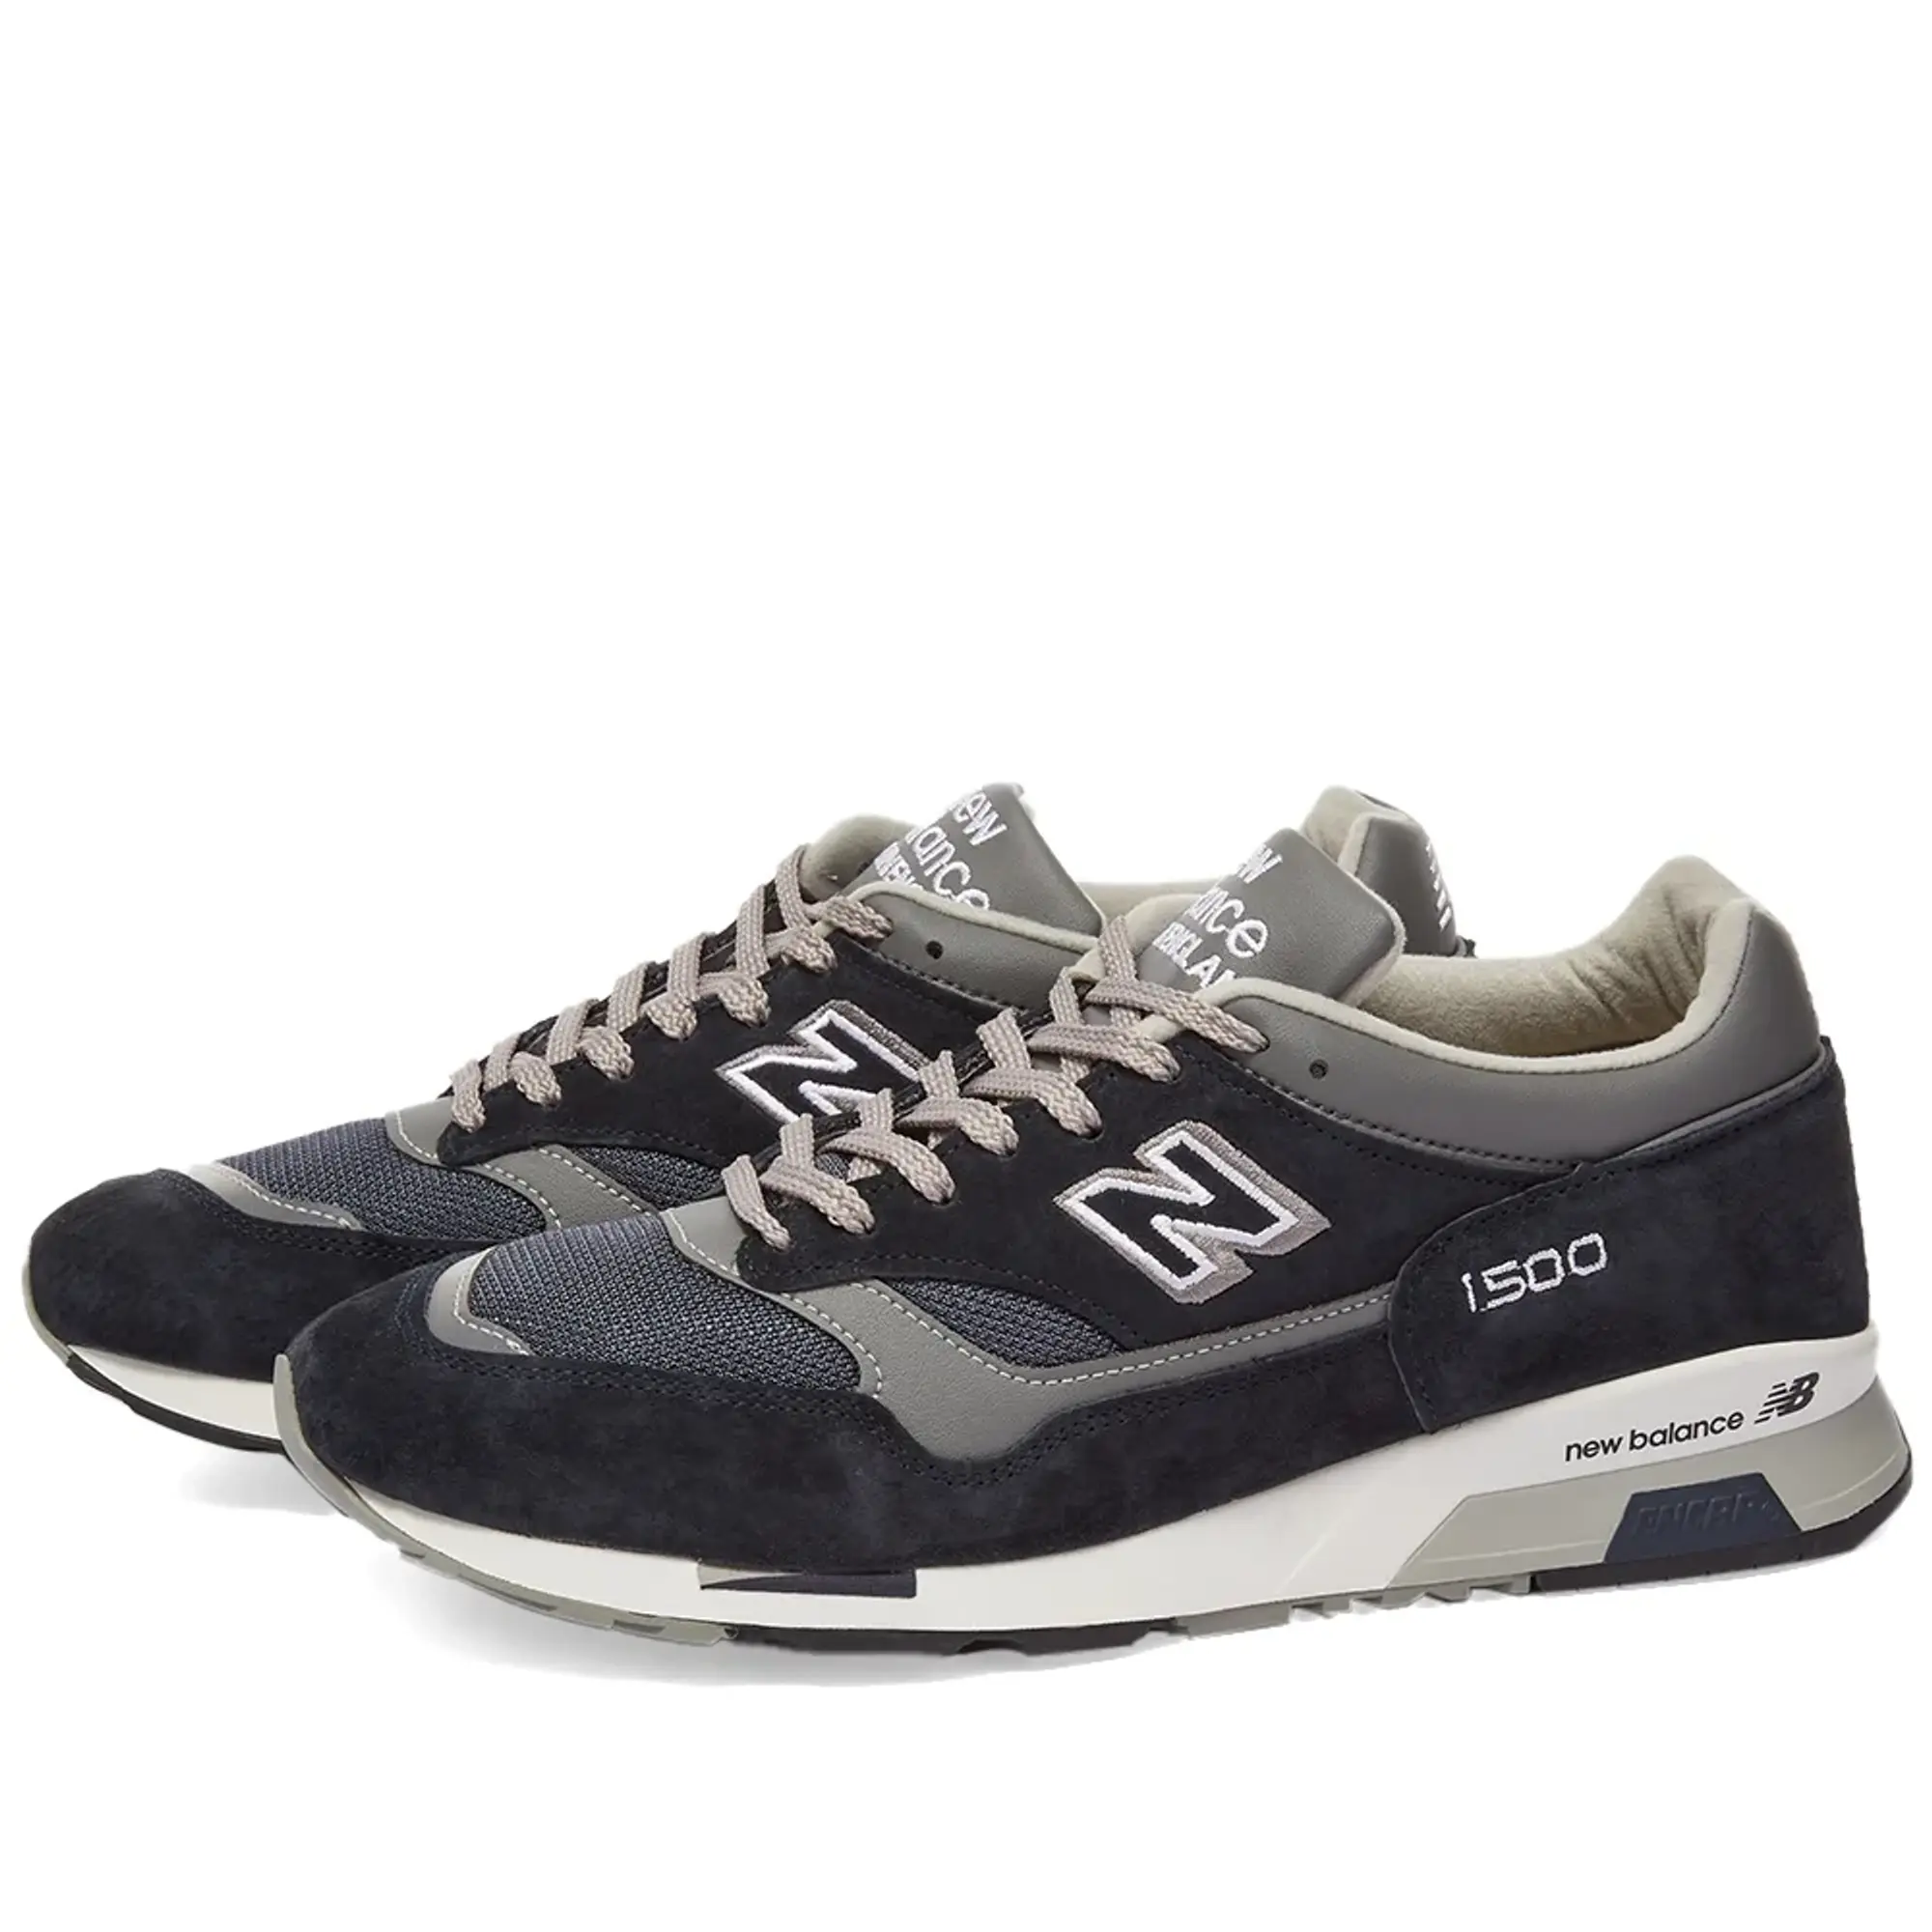 New Balance 1500 Made in UK, Blue